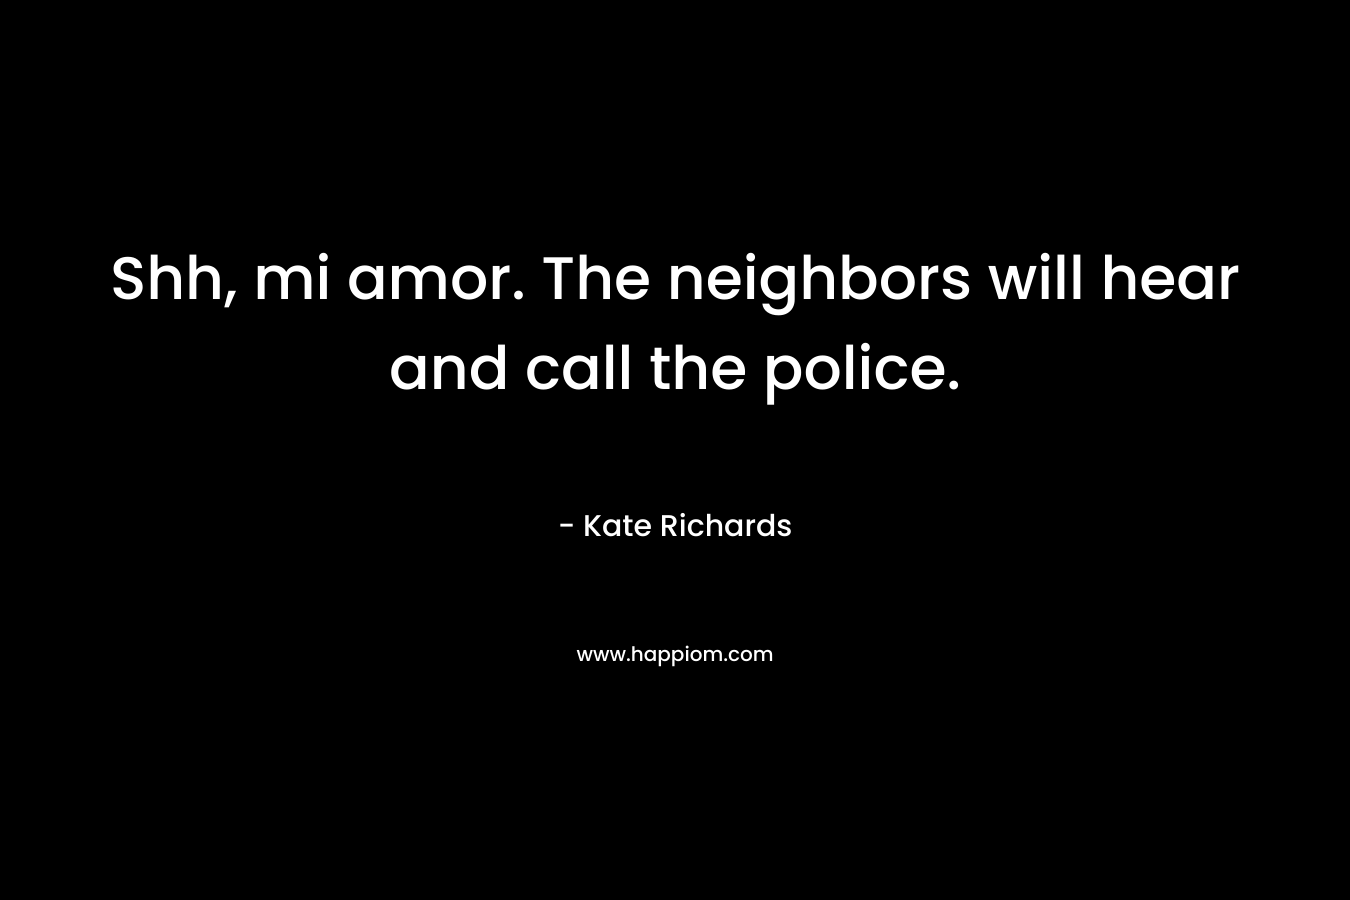 Shh, mi amor. The neighbors will hear and call the police. – Kate Richards